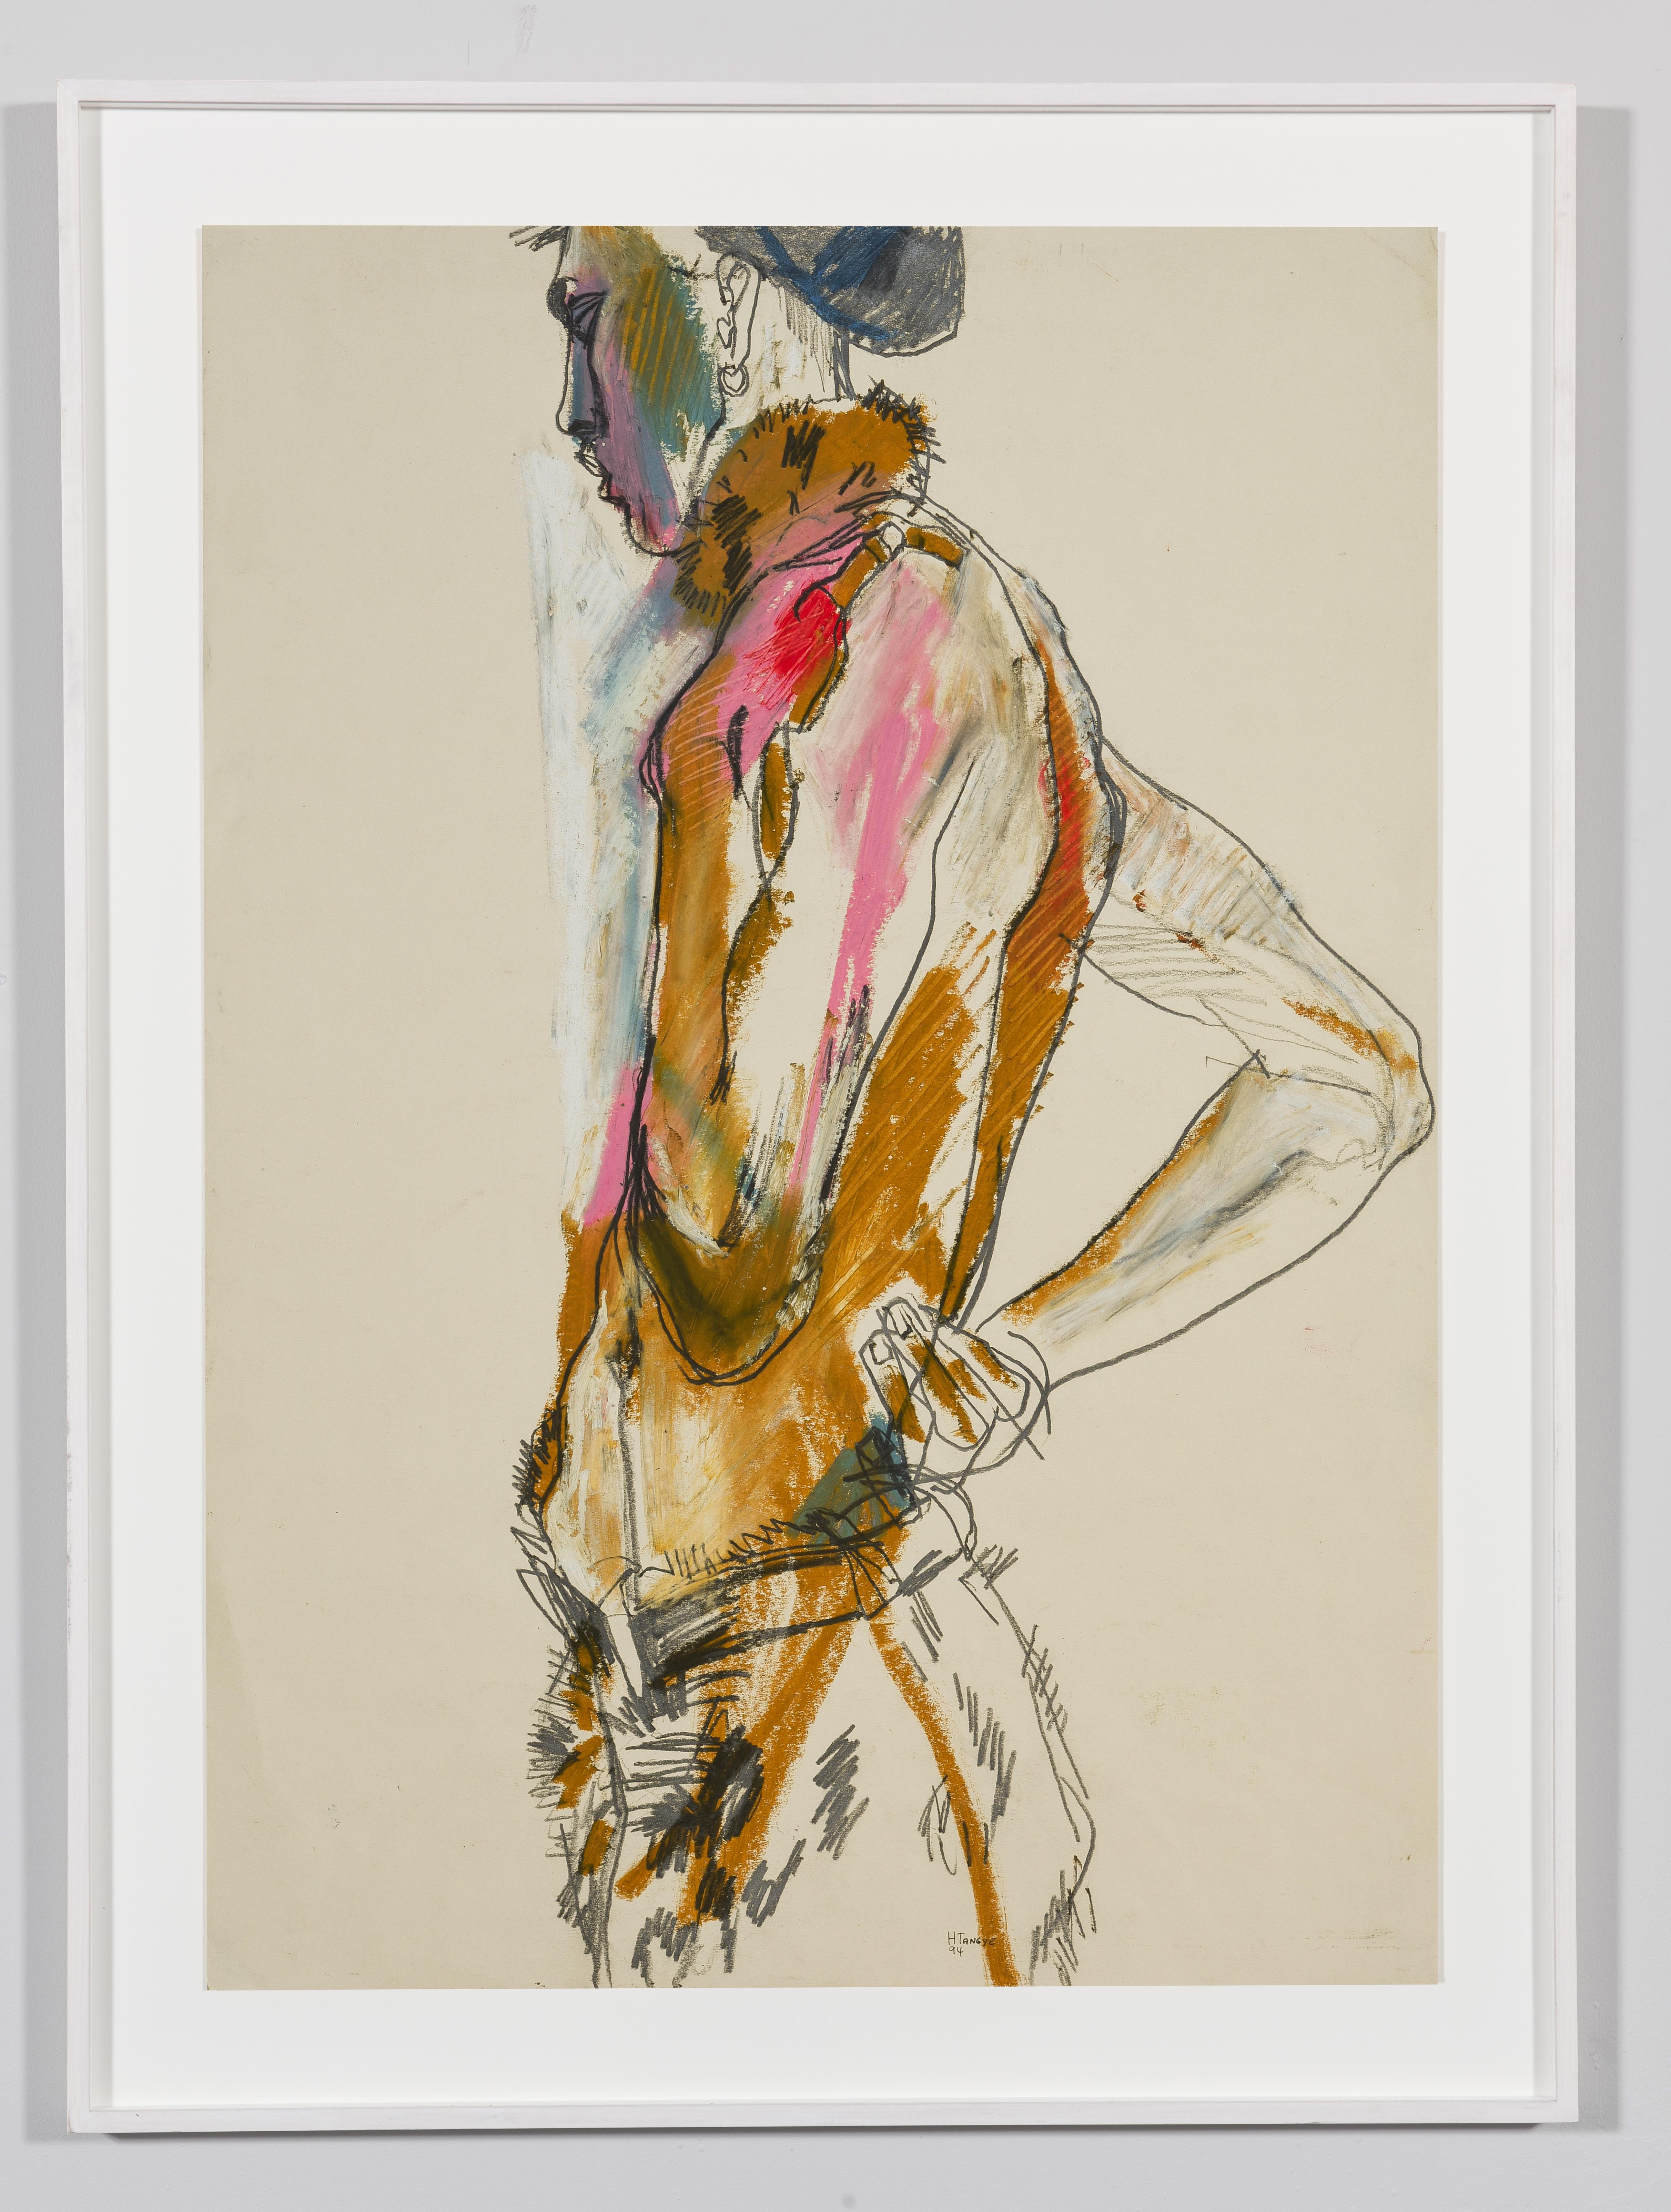 Stephan (Half Figure, Standing), Mixed media on paper - Painting by Howard Tangye